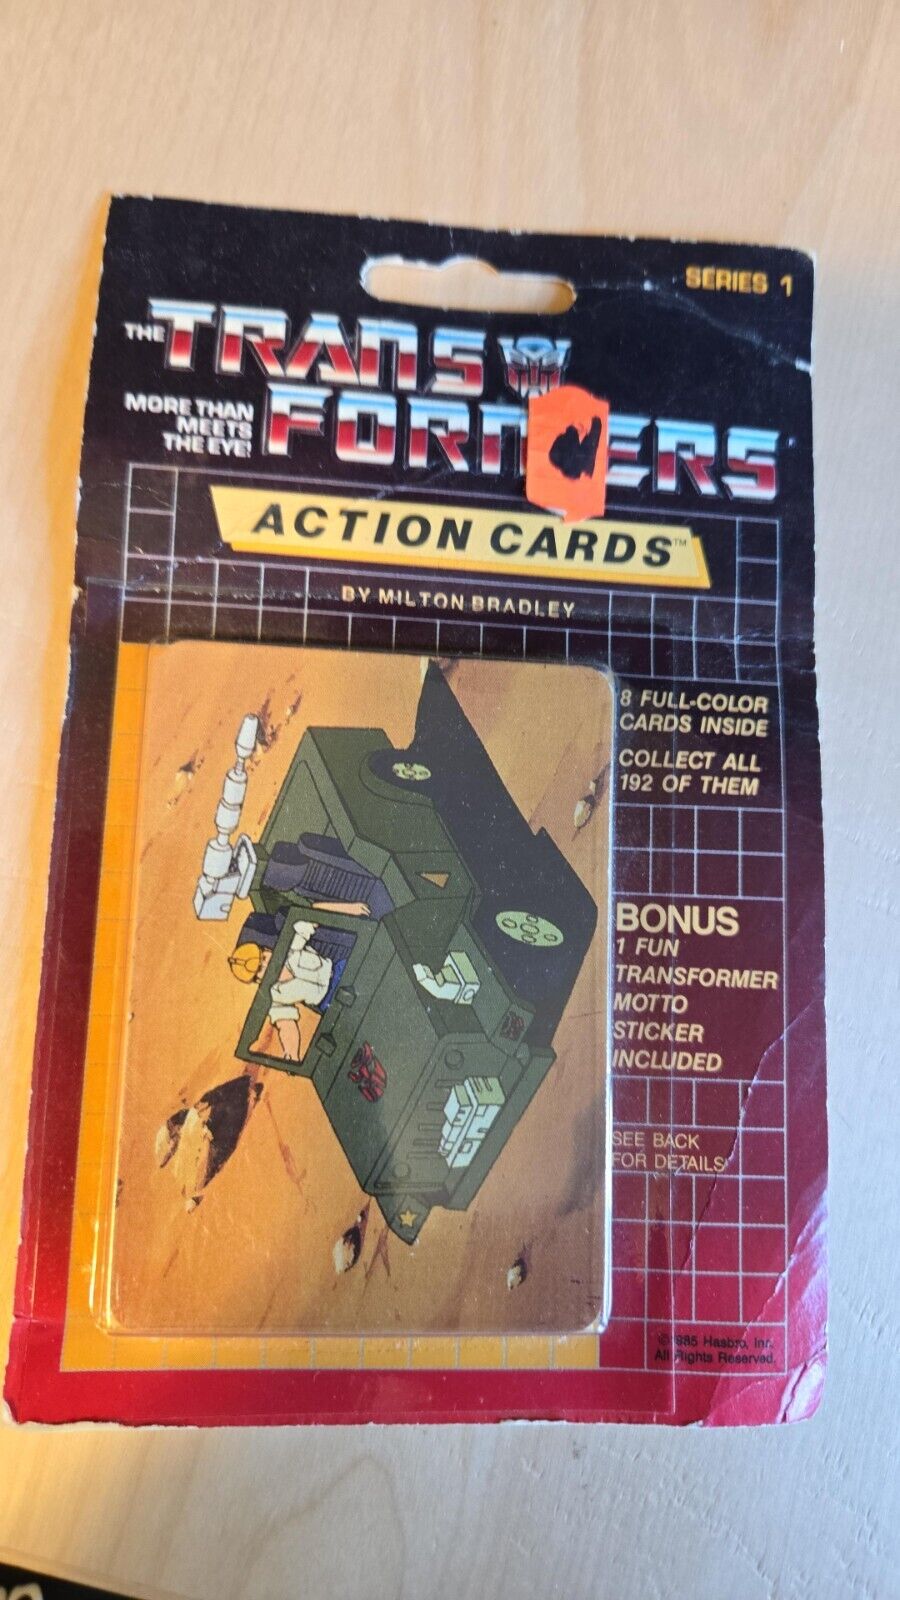 1985 Hasbro Transformers Action Cards Sealed Pack - Hound Rolls into Battle